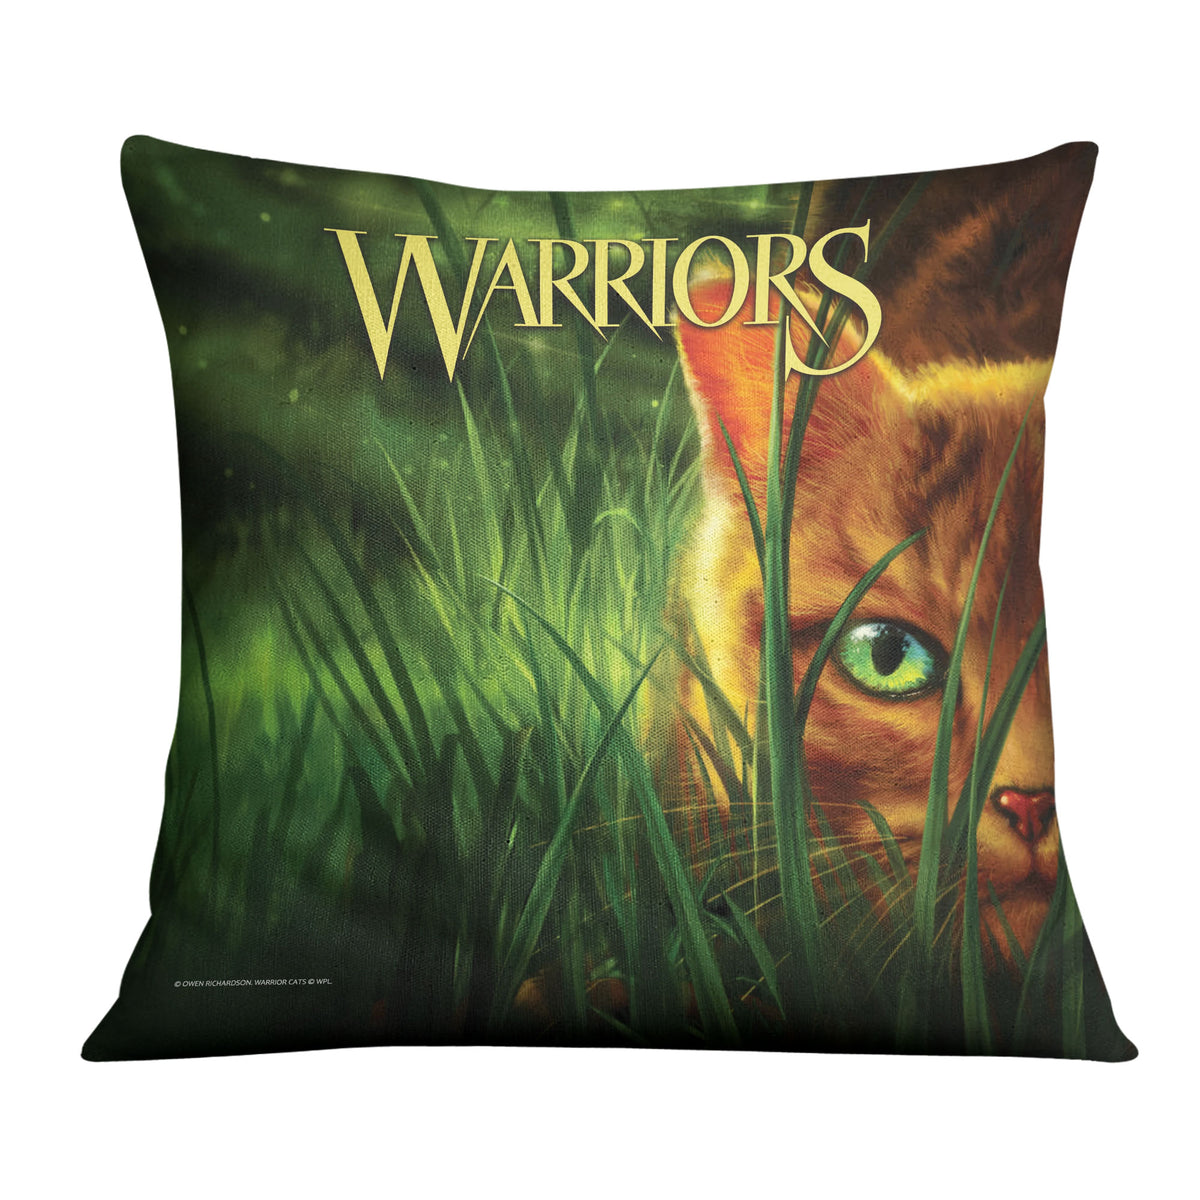 Into the Wild - 18x18 Cushion Warriors Cats Store - USA